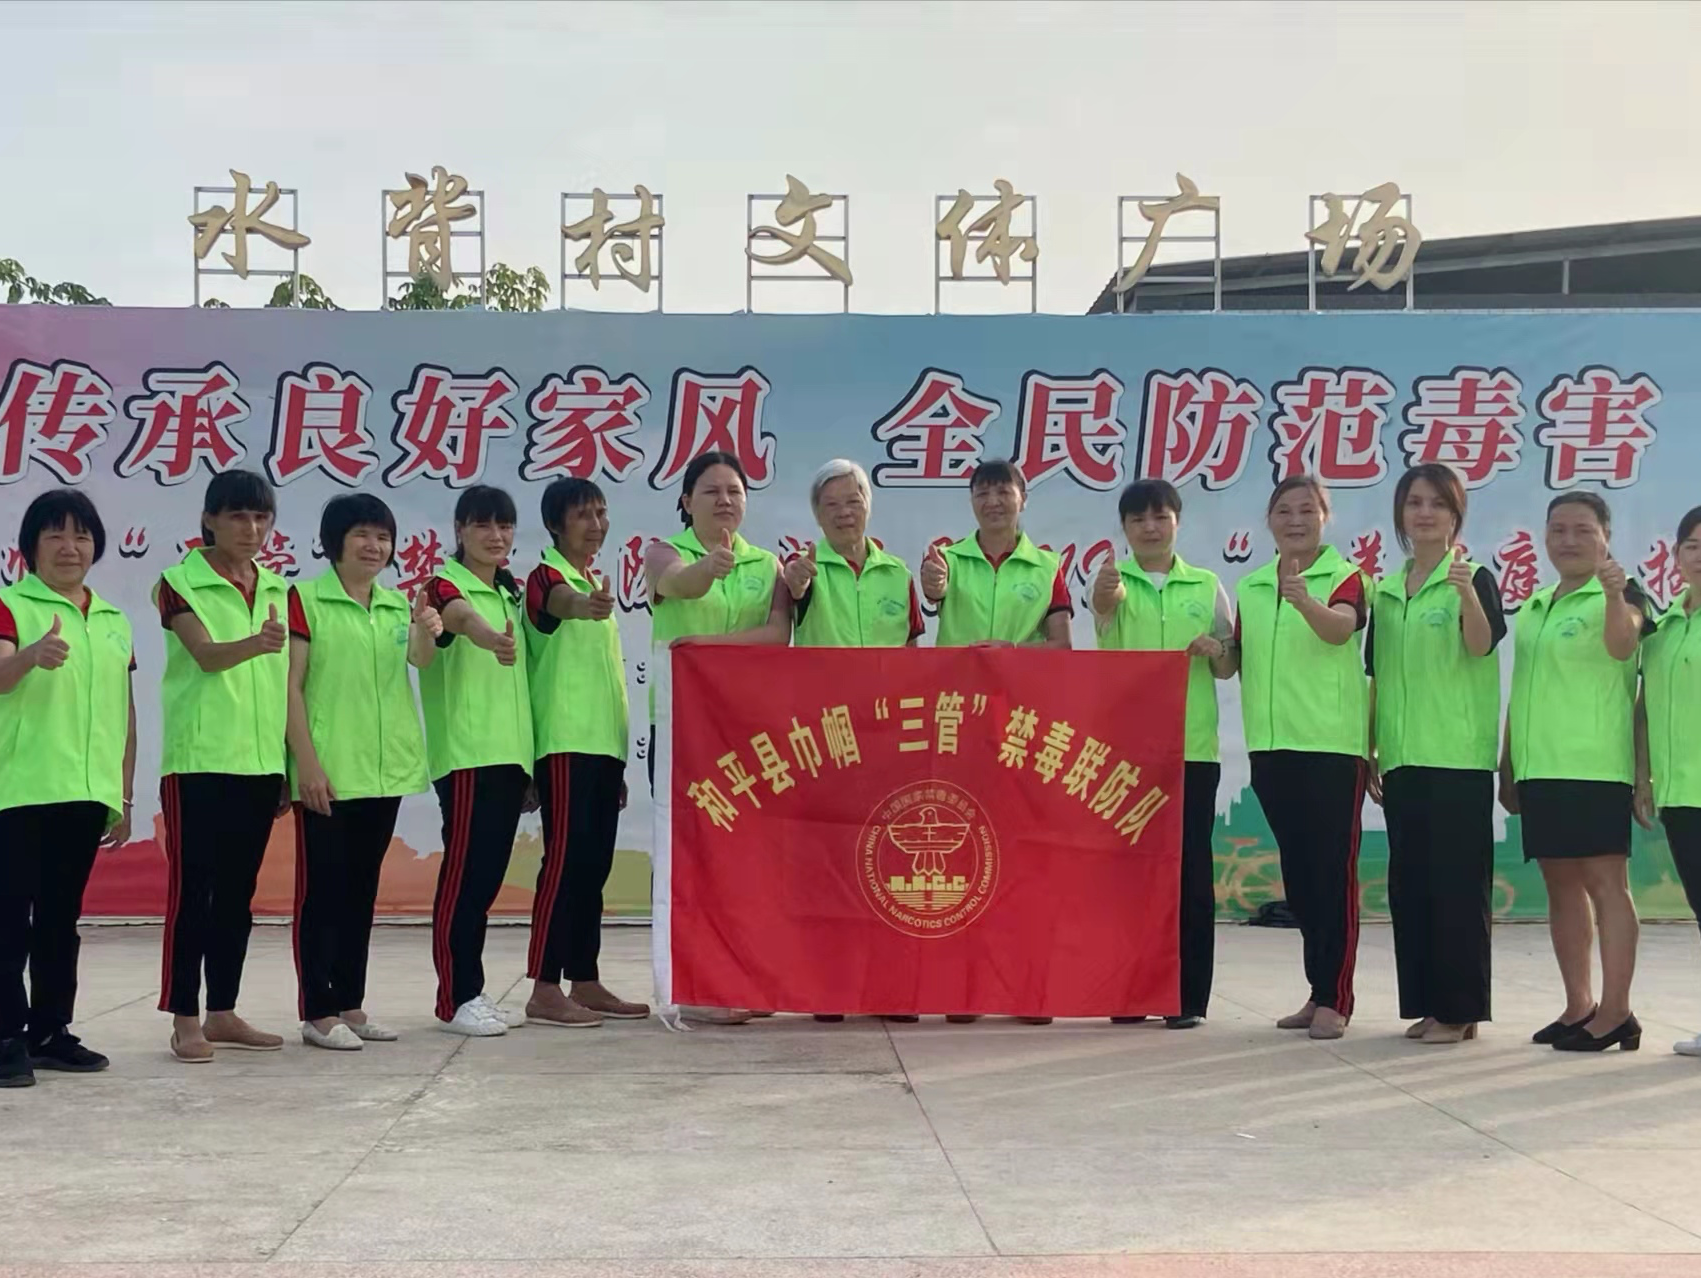  Shenhe Co building Shenzhen is helping | Shenhe Headquarters strongly supports rural women to contribute to rural revitalization